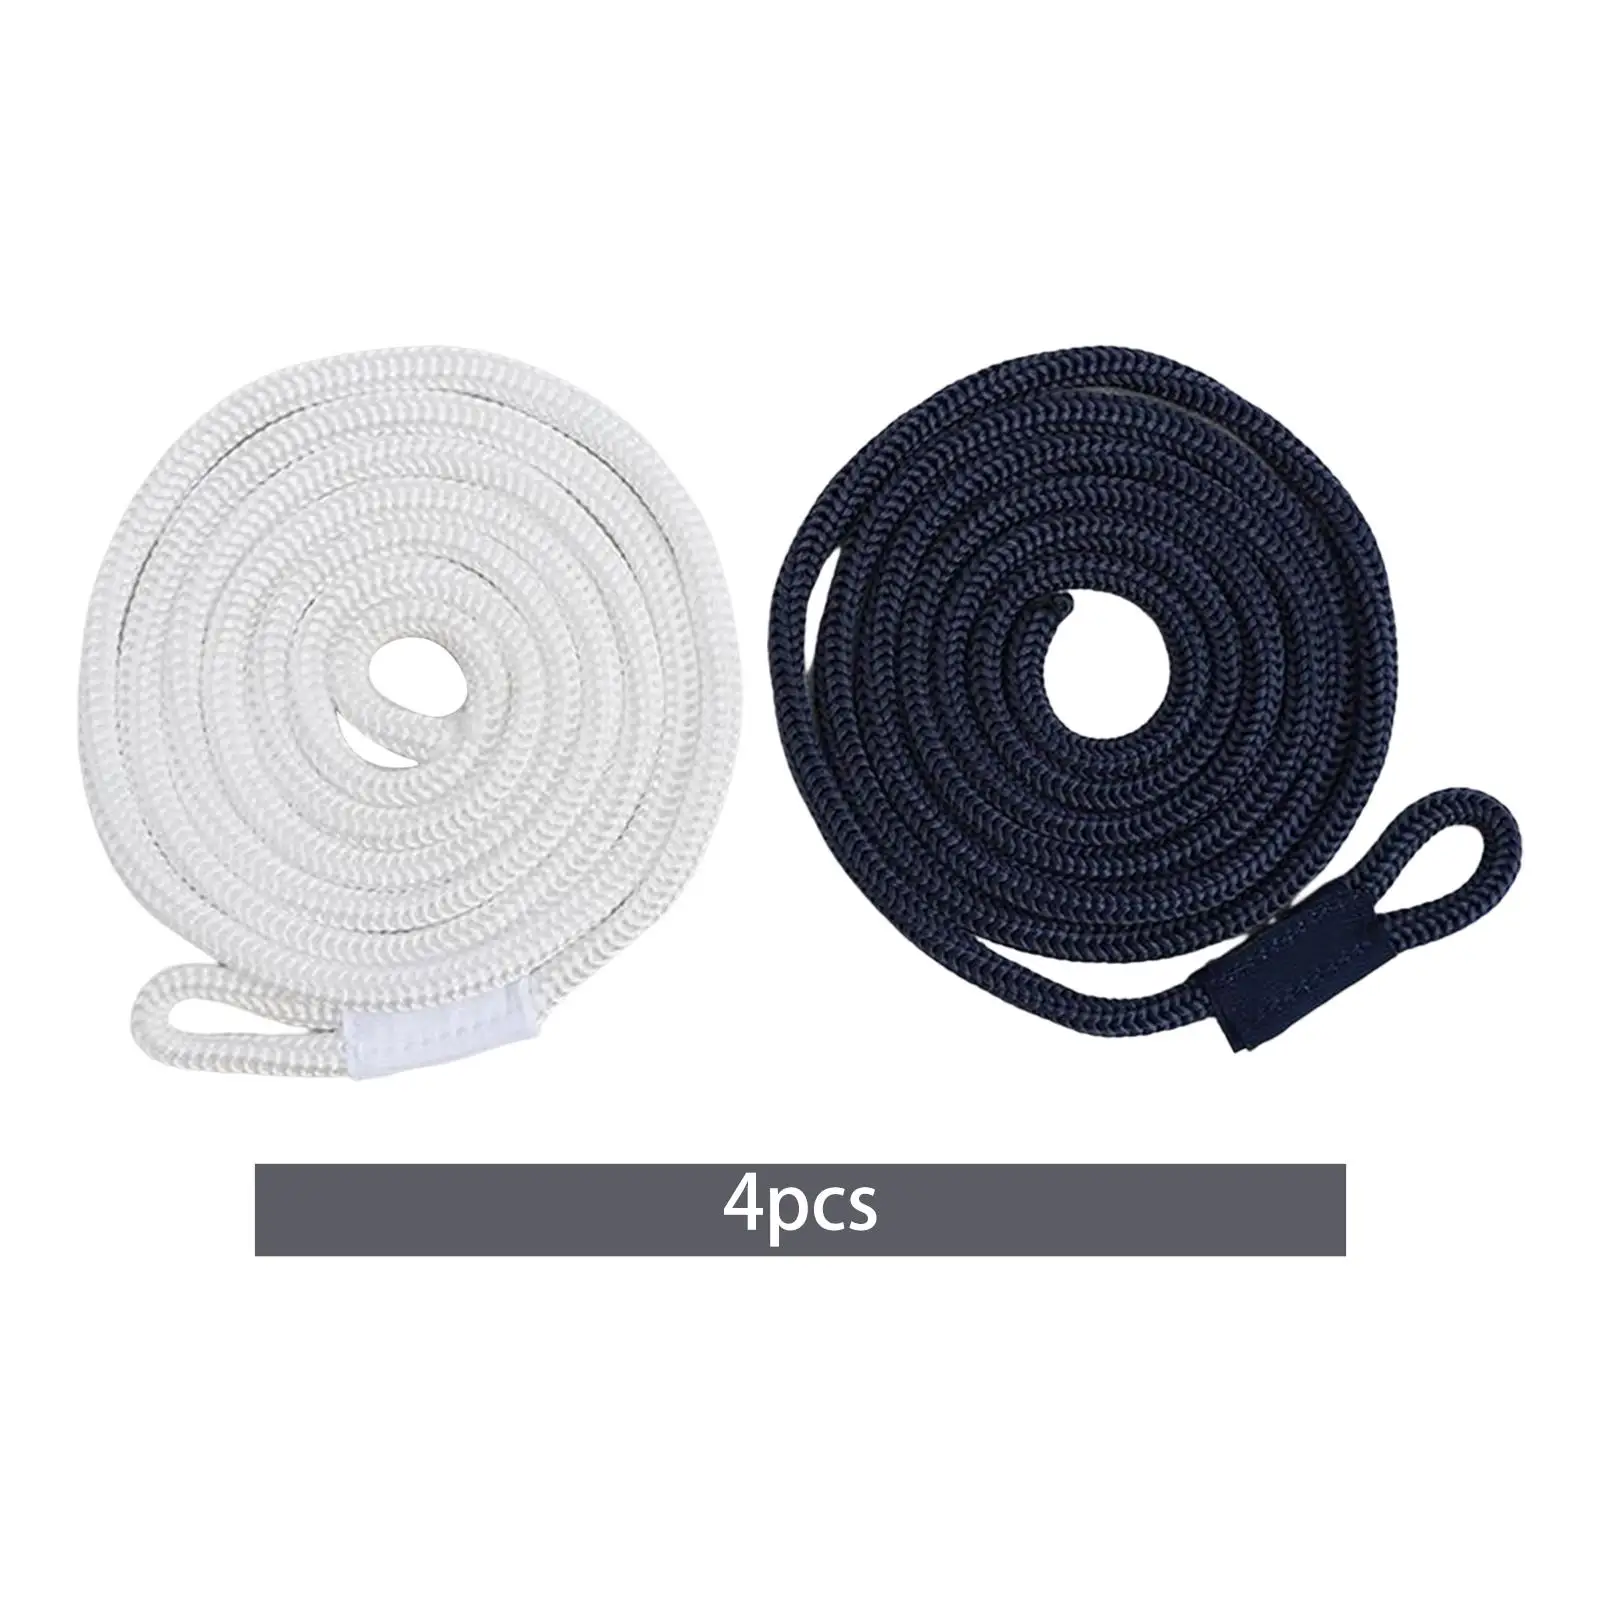 

4Pcs Boat Ropes, Boat Lines Braid Durable Marine Rope 2M Boat Lines Line for Dock, Row Boats, Pontoon